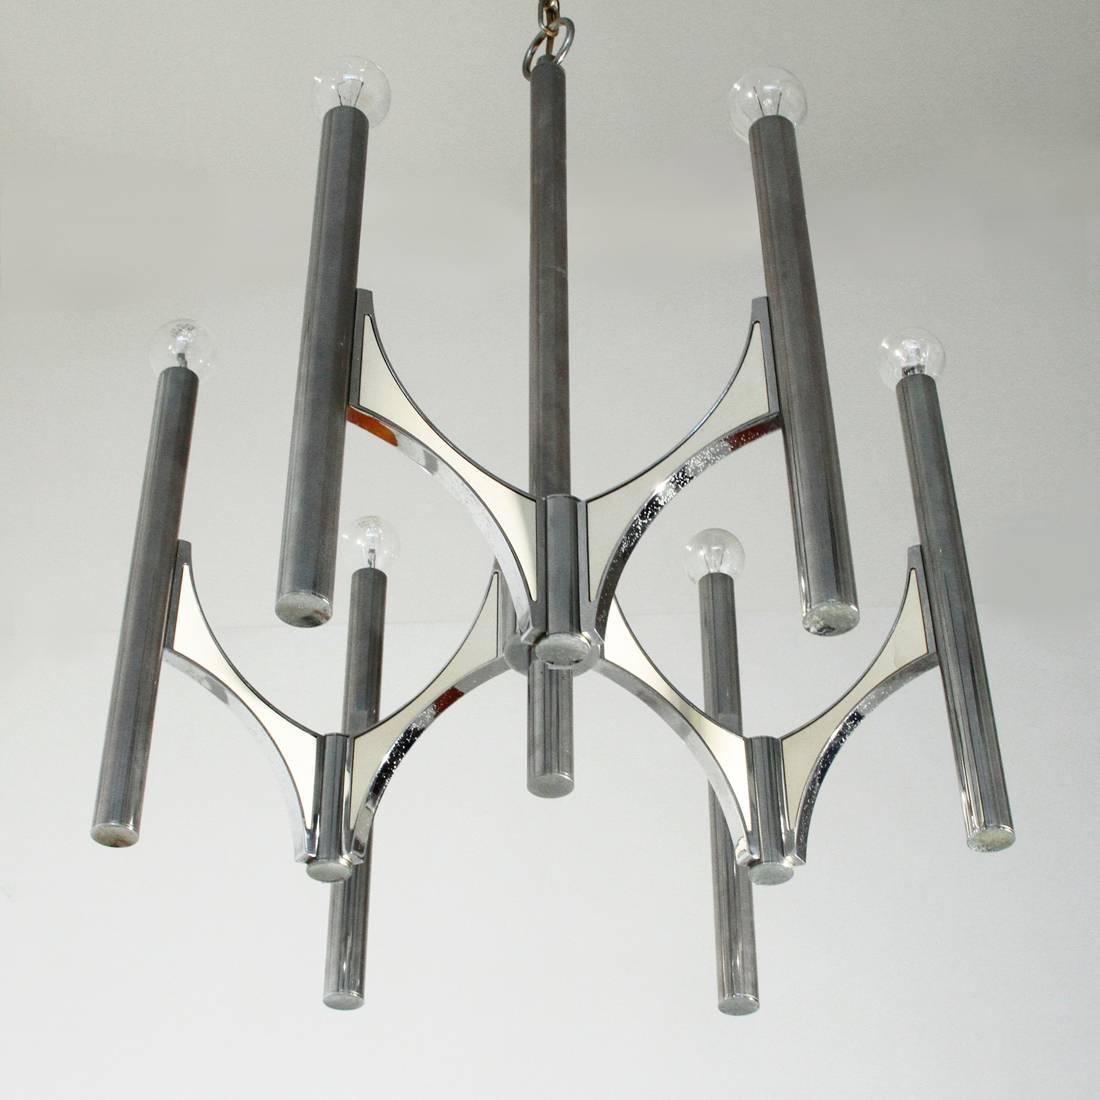 1940s Italian-style chandelier.
Brass structure, sandblasted glass diffusers with decorations.
It mounts three bulbs.
Good general conditions.

Dimensions: Diameter 50 cm, height 80 cm.
    